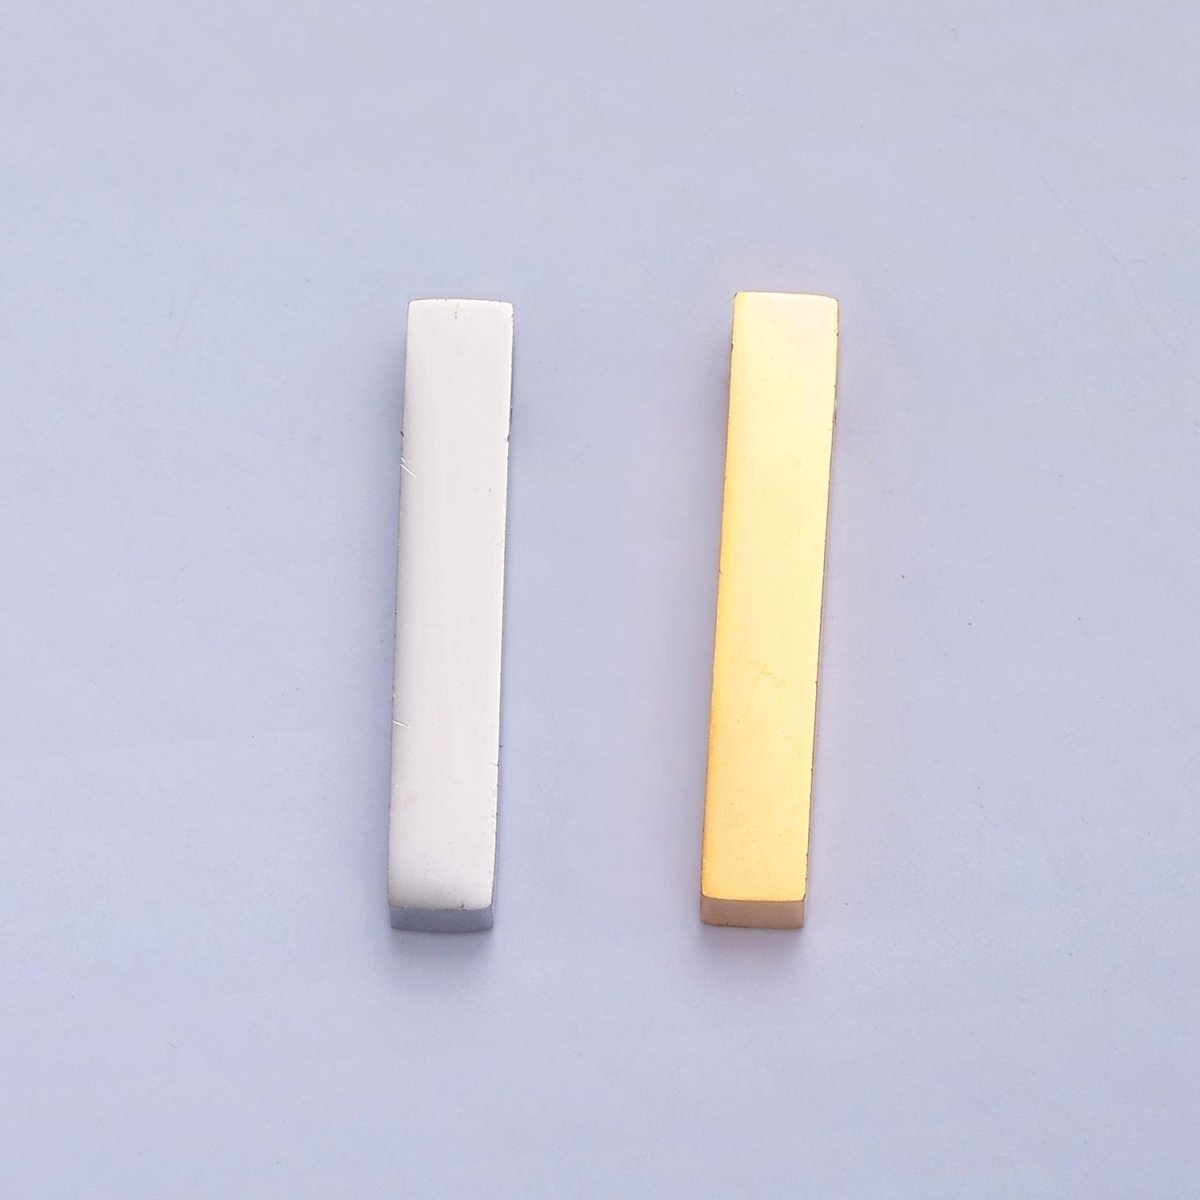 19.7mmx3.2mm Long Tube Bead Spacer For Jewelry Making, W-835 W-836 - DLUXCA